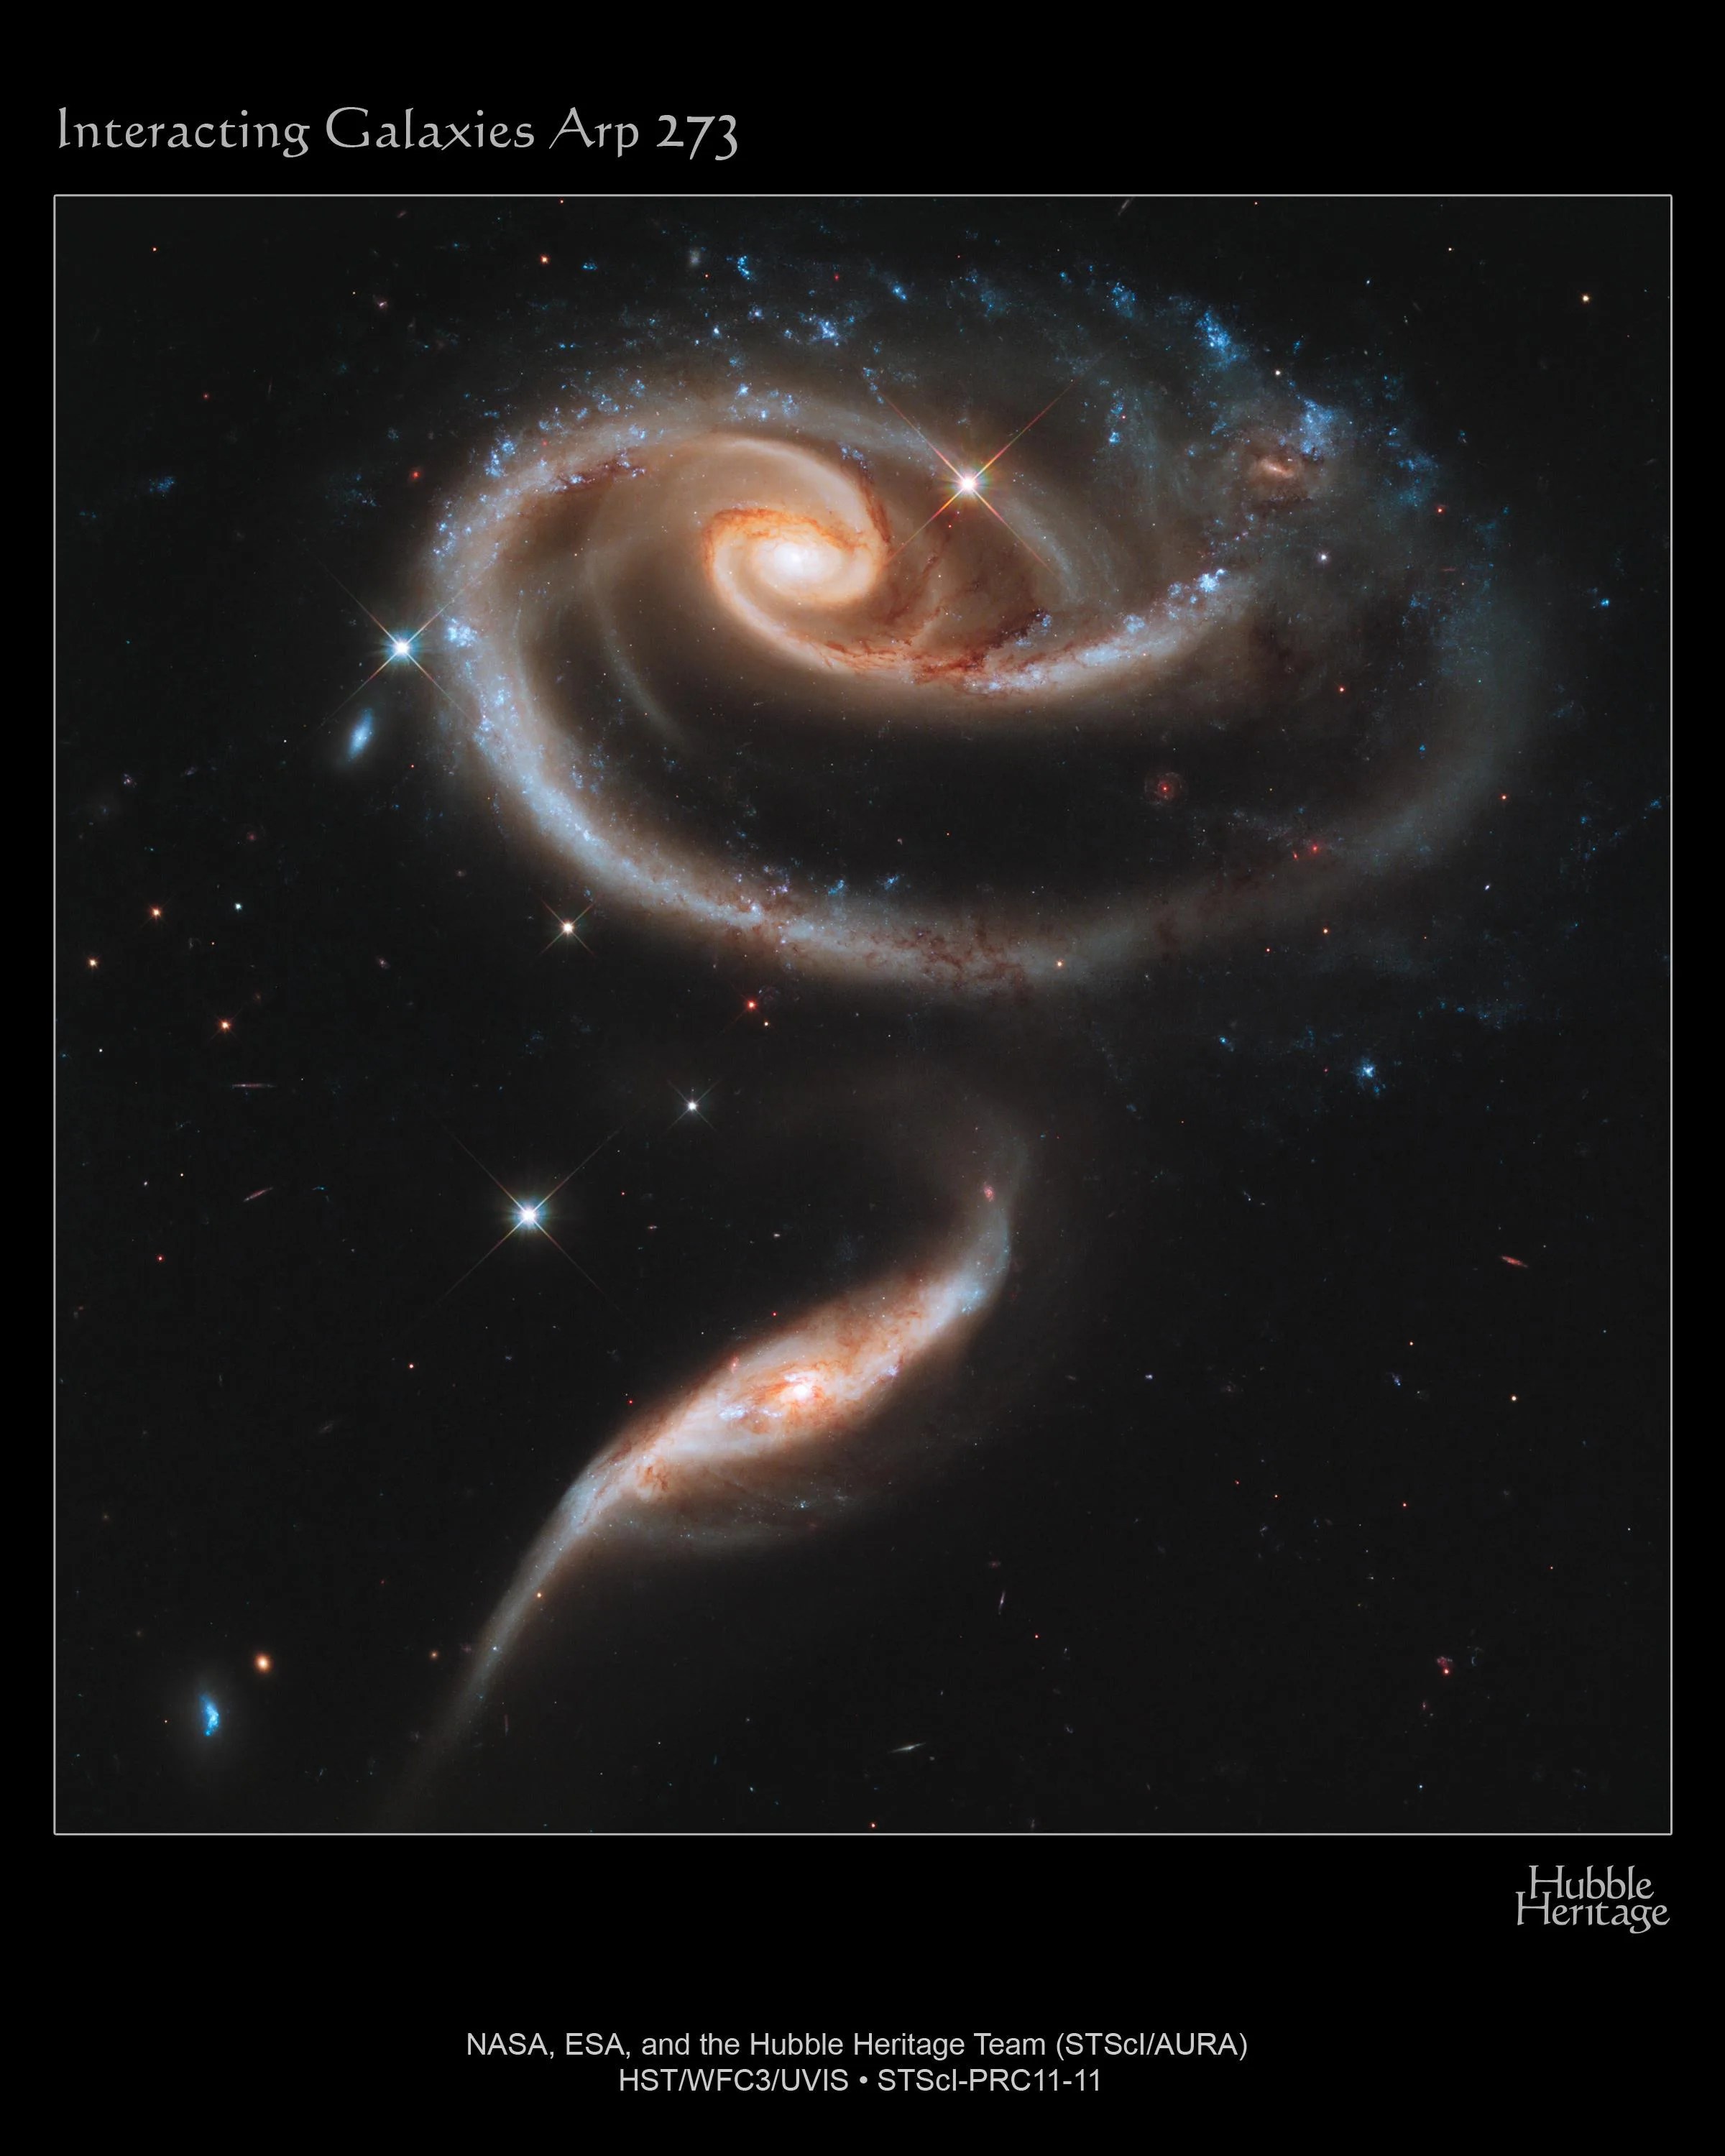 A 'rose' made of galaxies